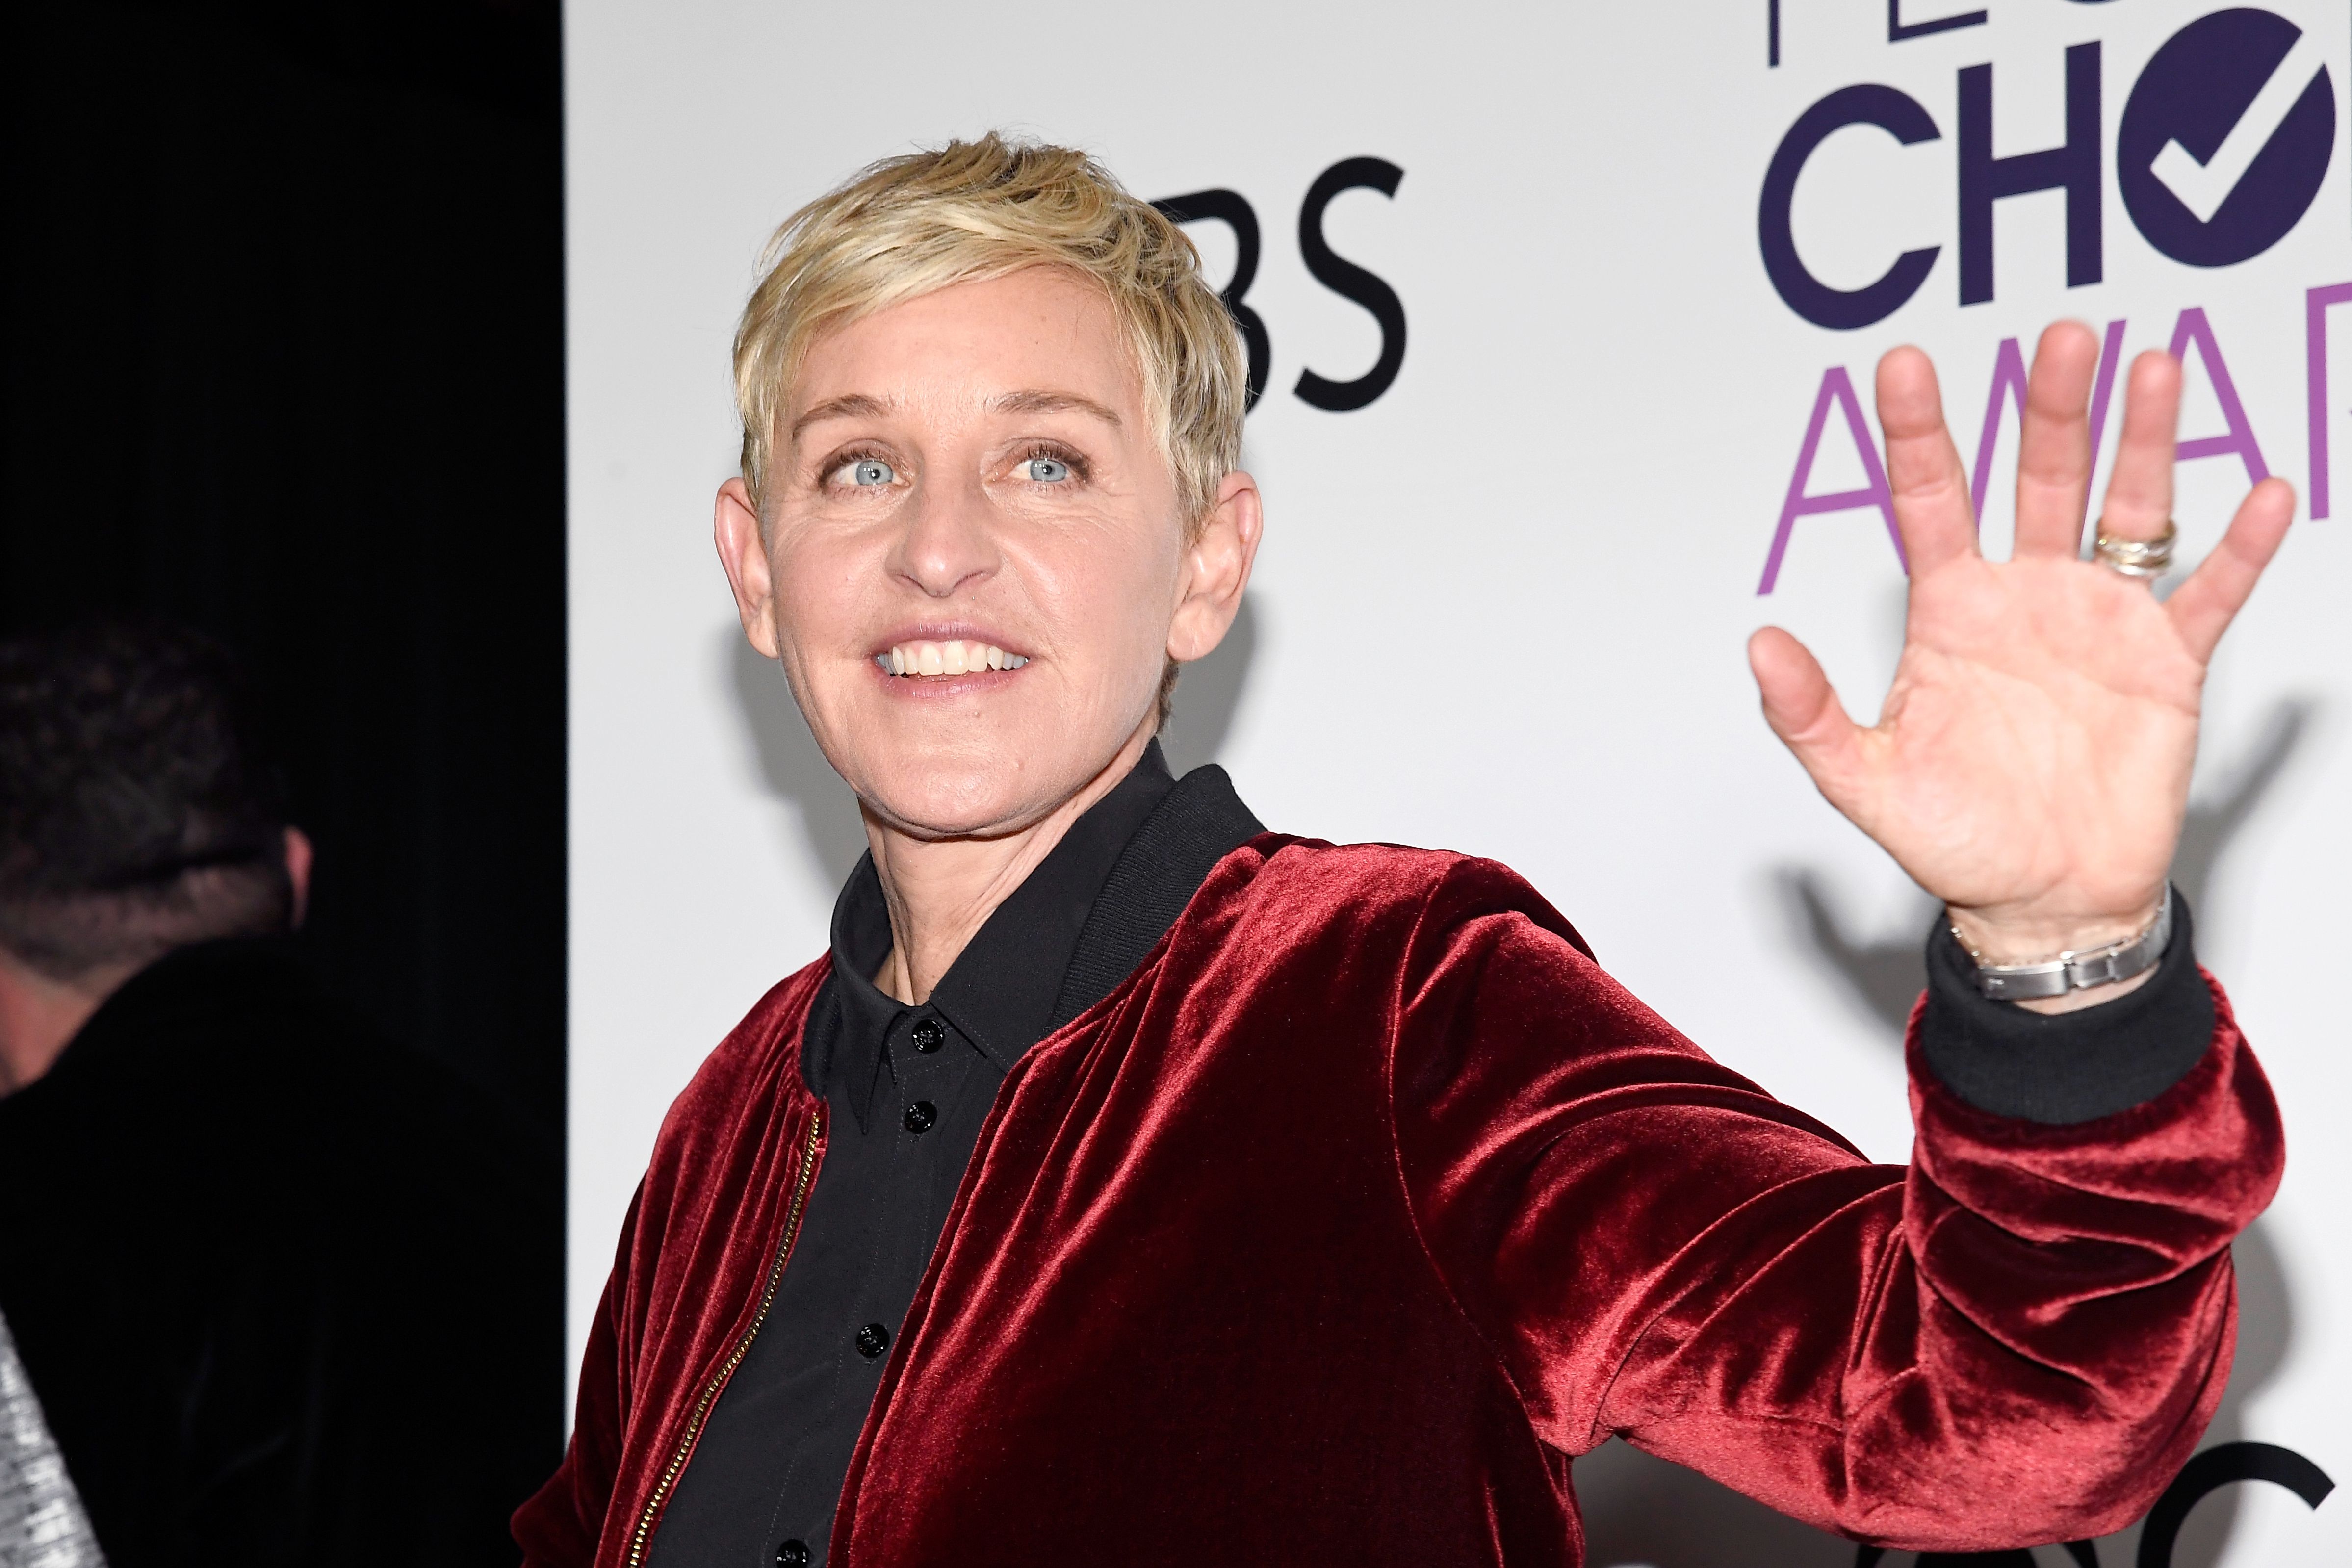 Ellen Degeneres poses in the press room during the People's Choice Awards on January 18, 2017, in Los Angeles, California | Photo: Kevork Djansezian/Getty Images